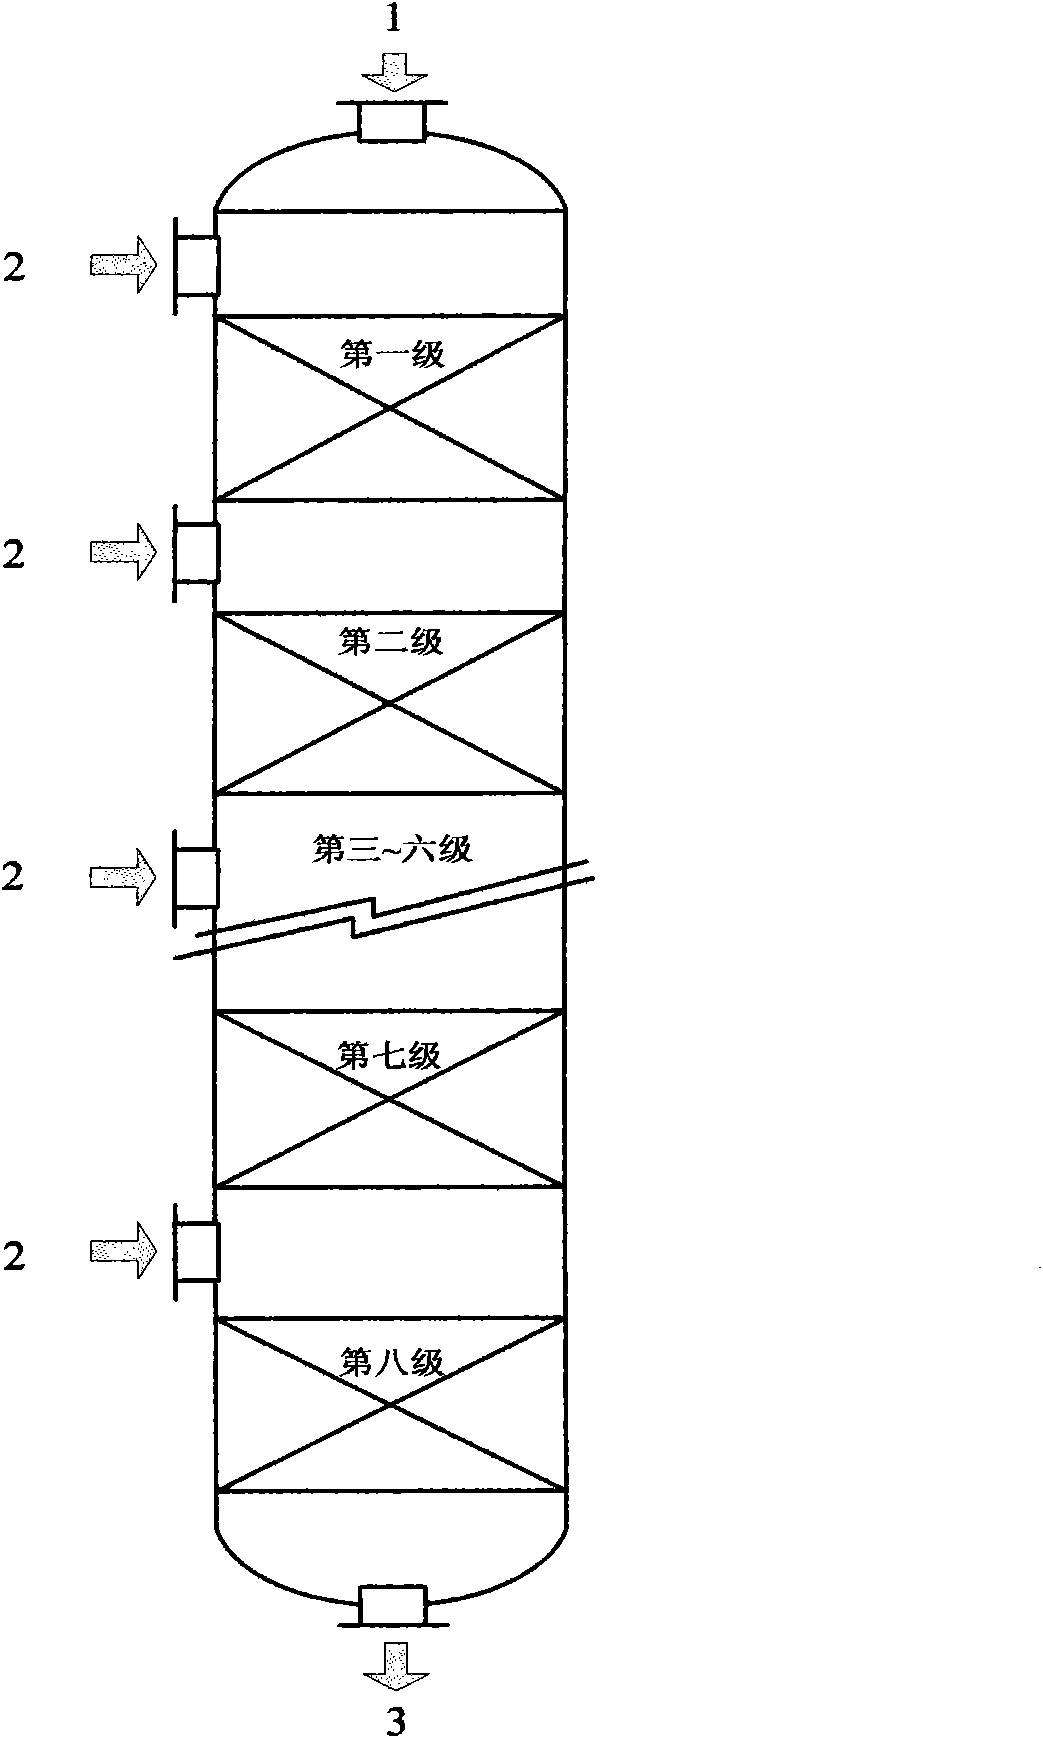 Fixed bed multistage reactor for aromatizing reaction of olefin-containing liquefying gas